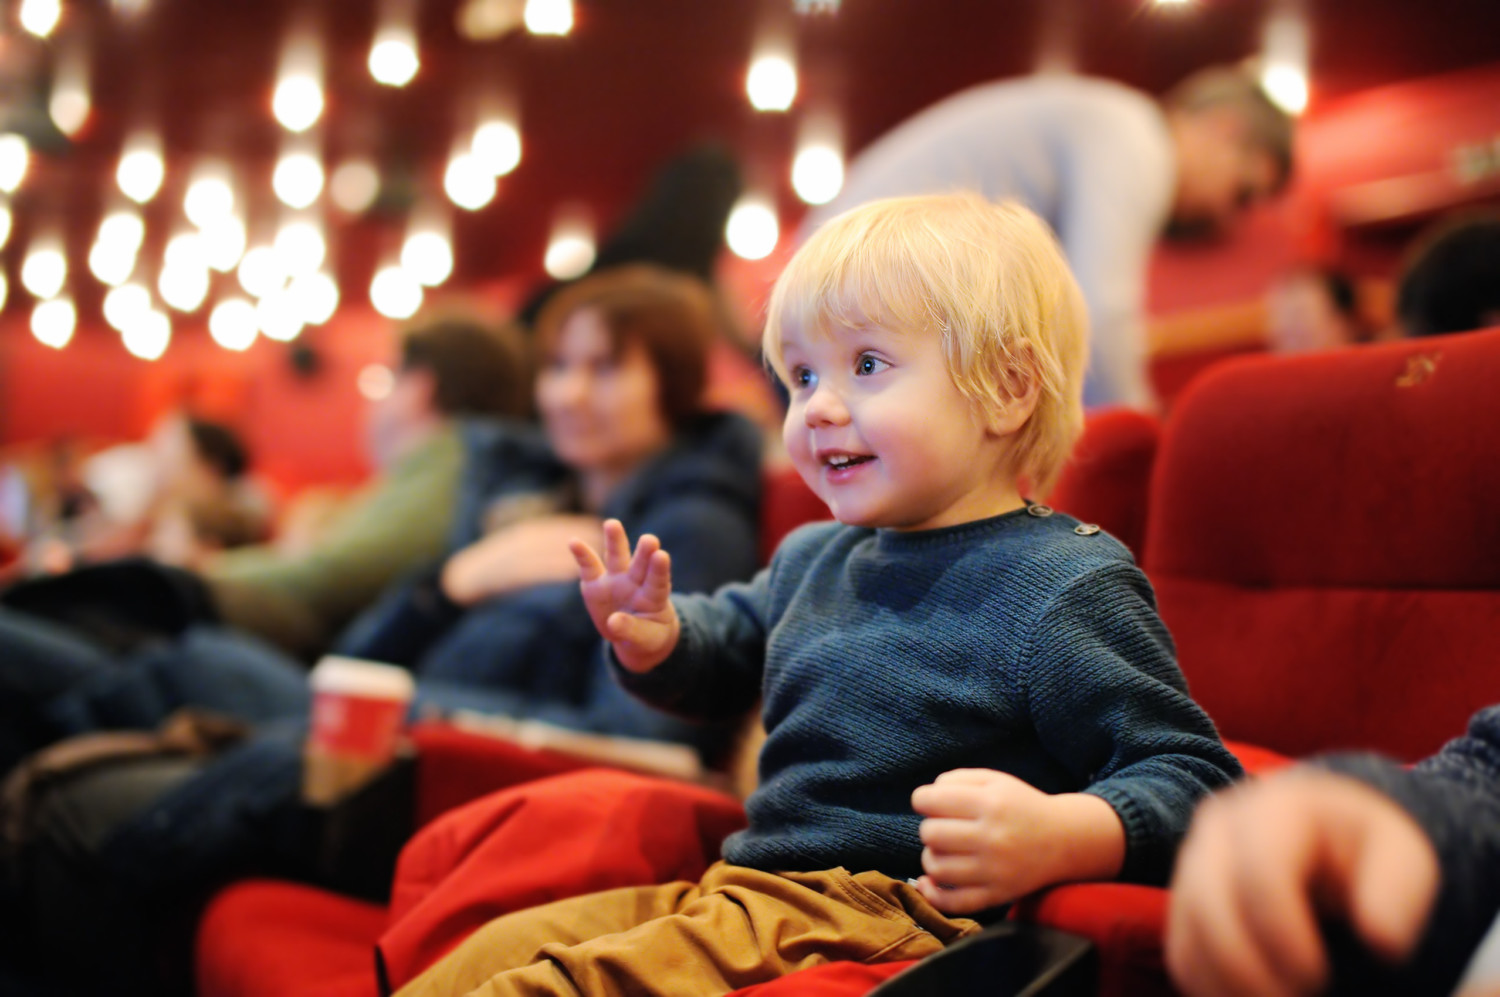 These theaters are now offering sensoryfriendly movies